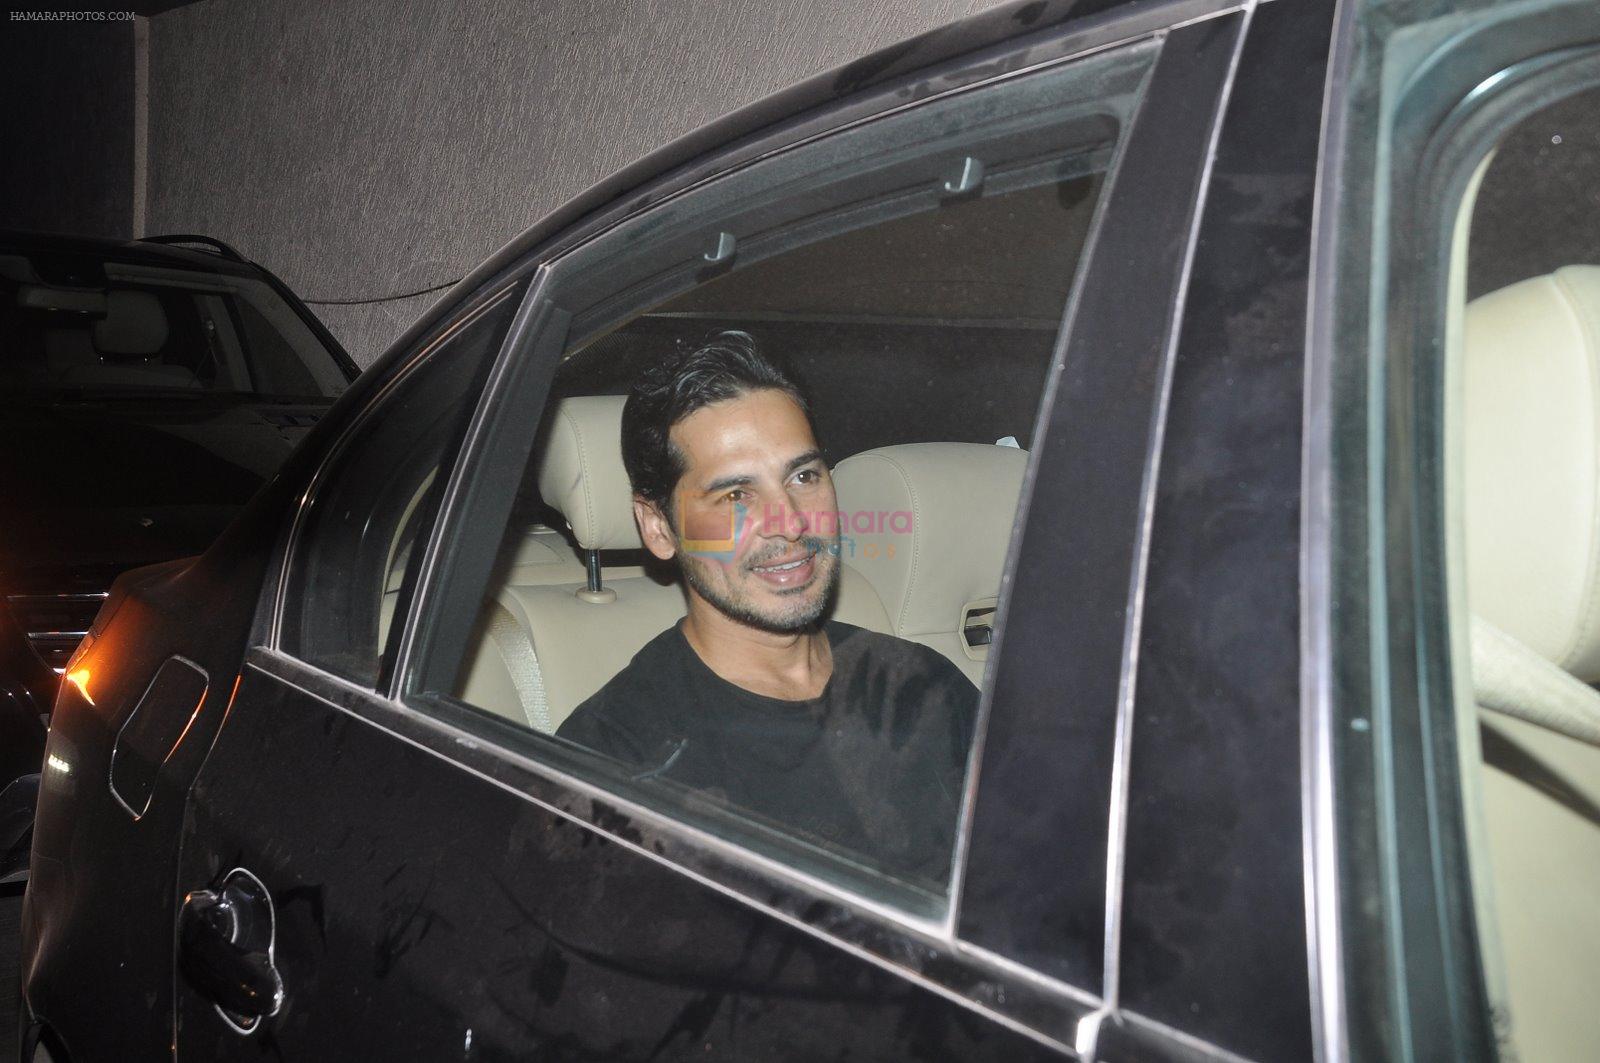 Dino Morea snapped at Lightbox on 24th March 2015